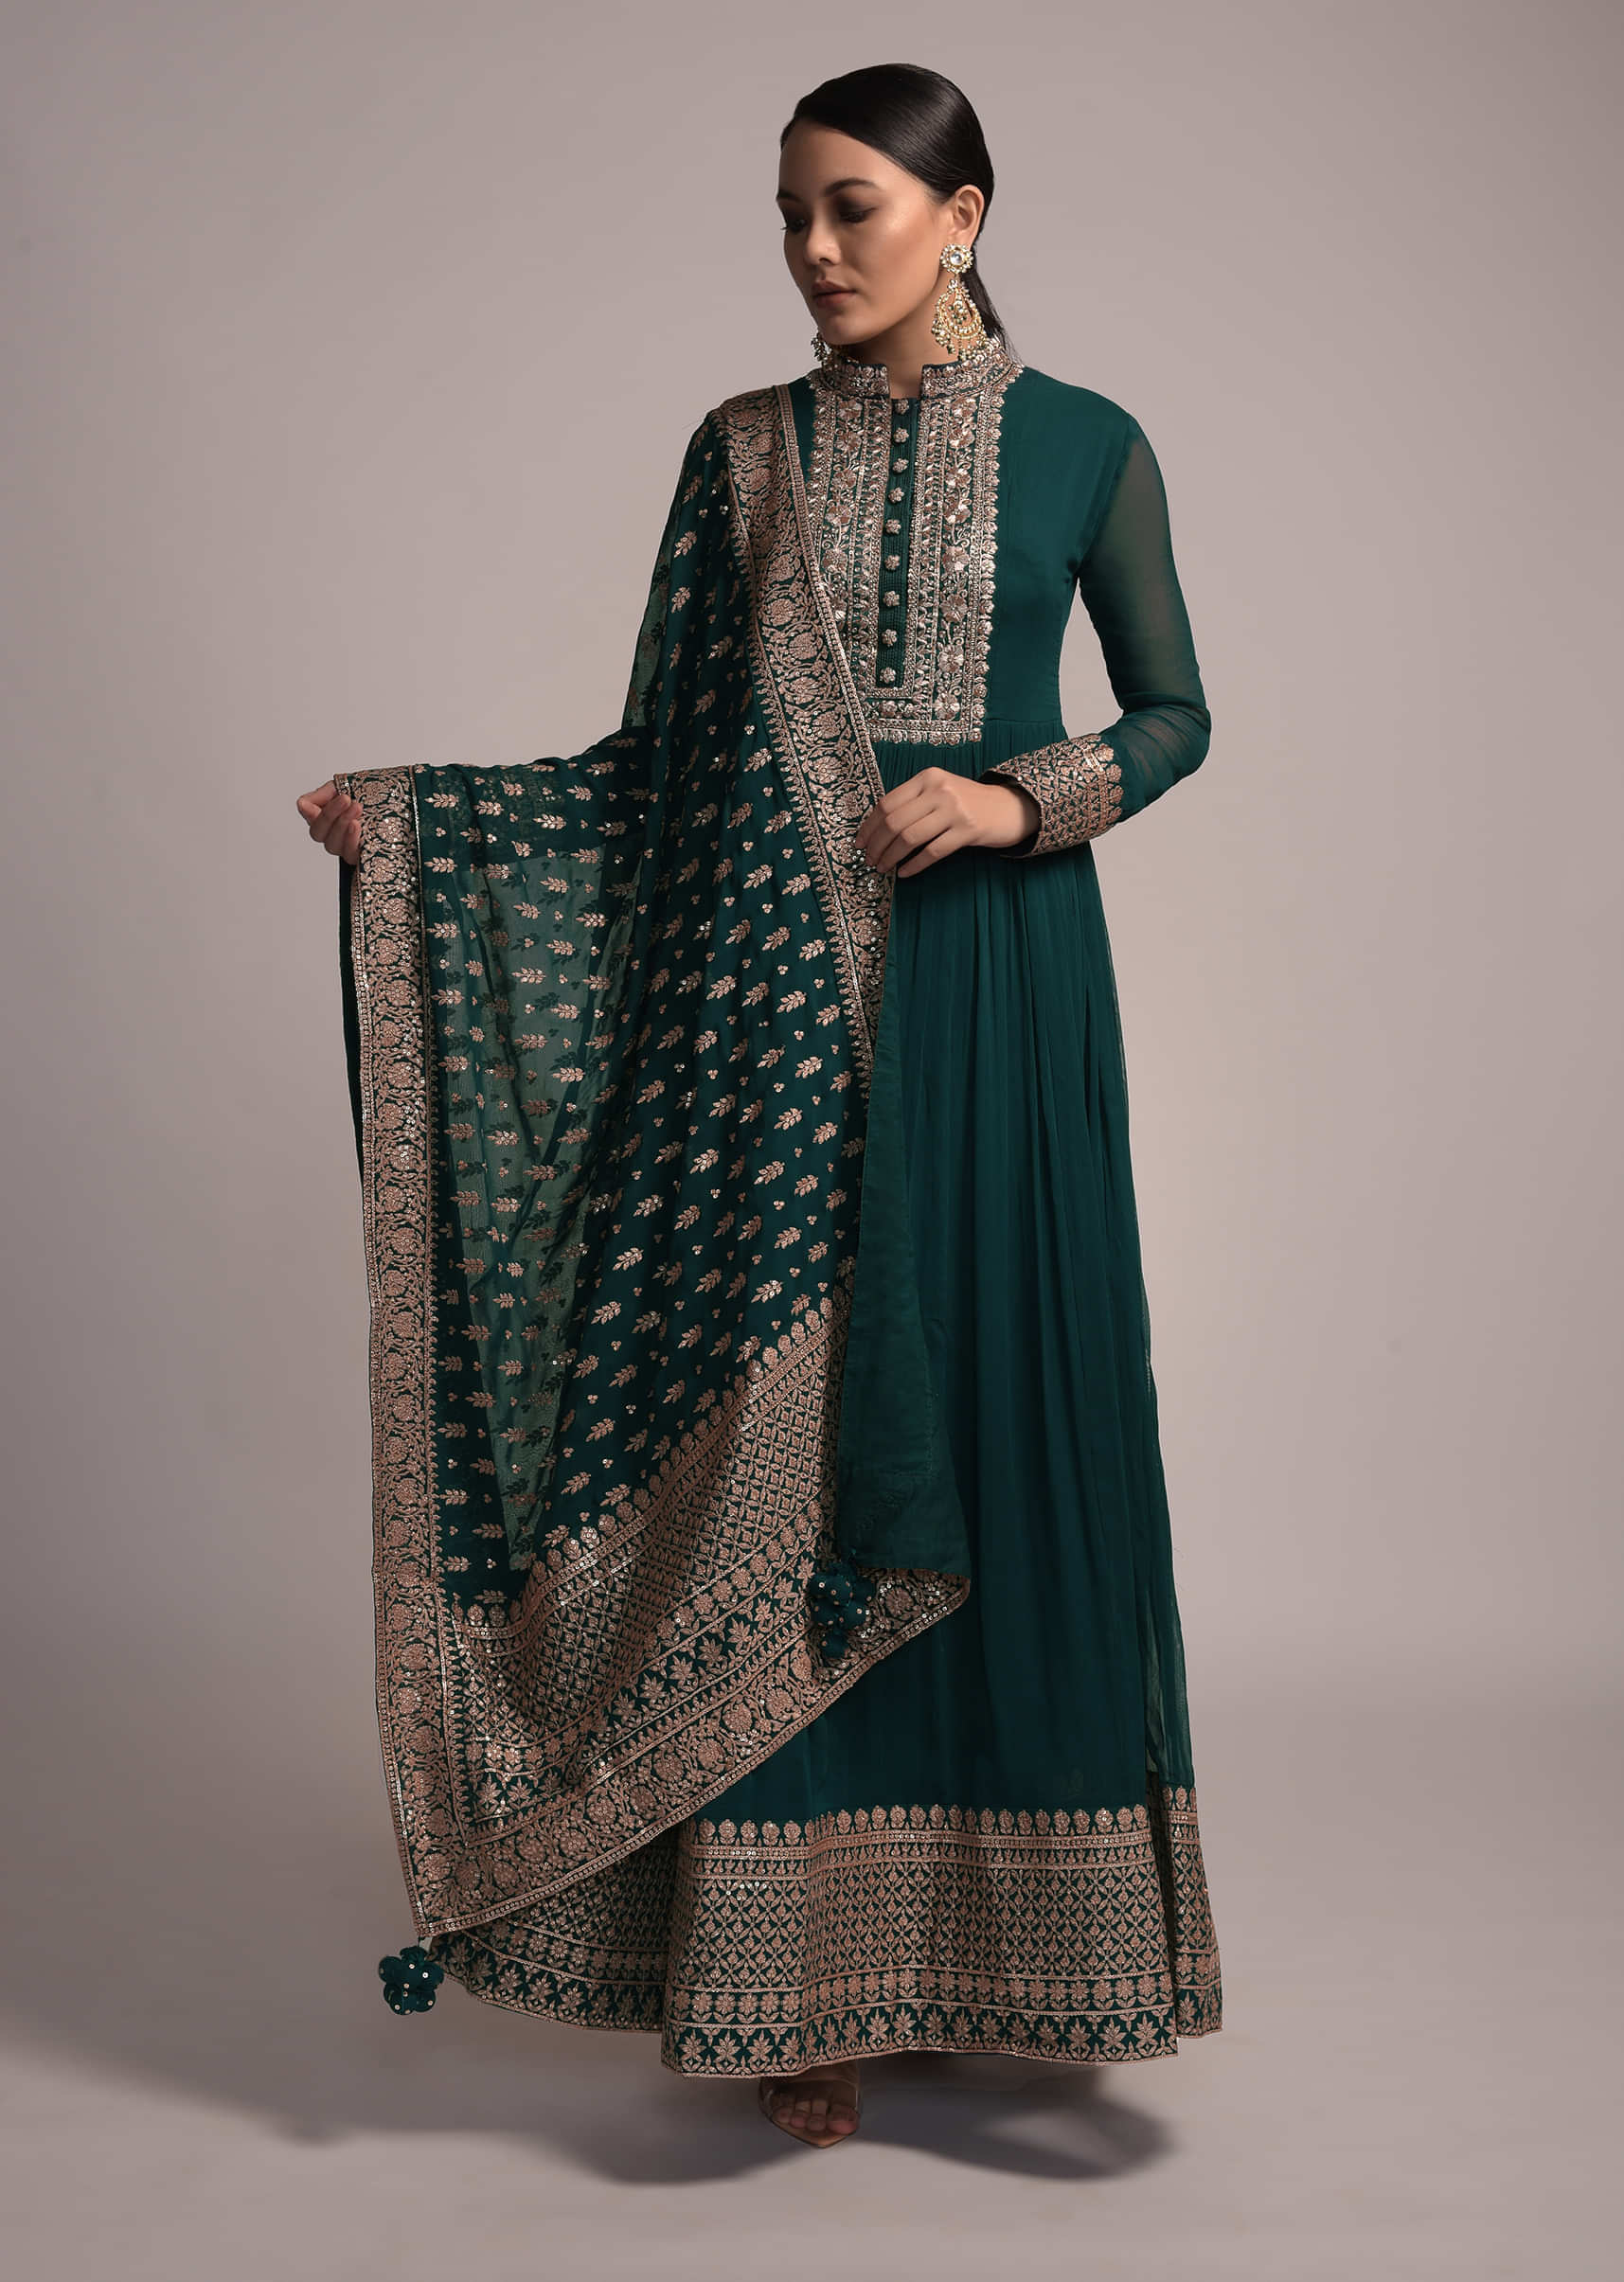 Teal Green Anarkali Suit In Georgette With Zardozi And Zari Embroidery Work